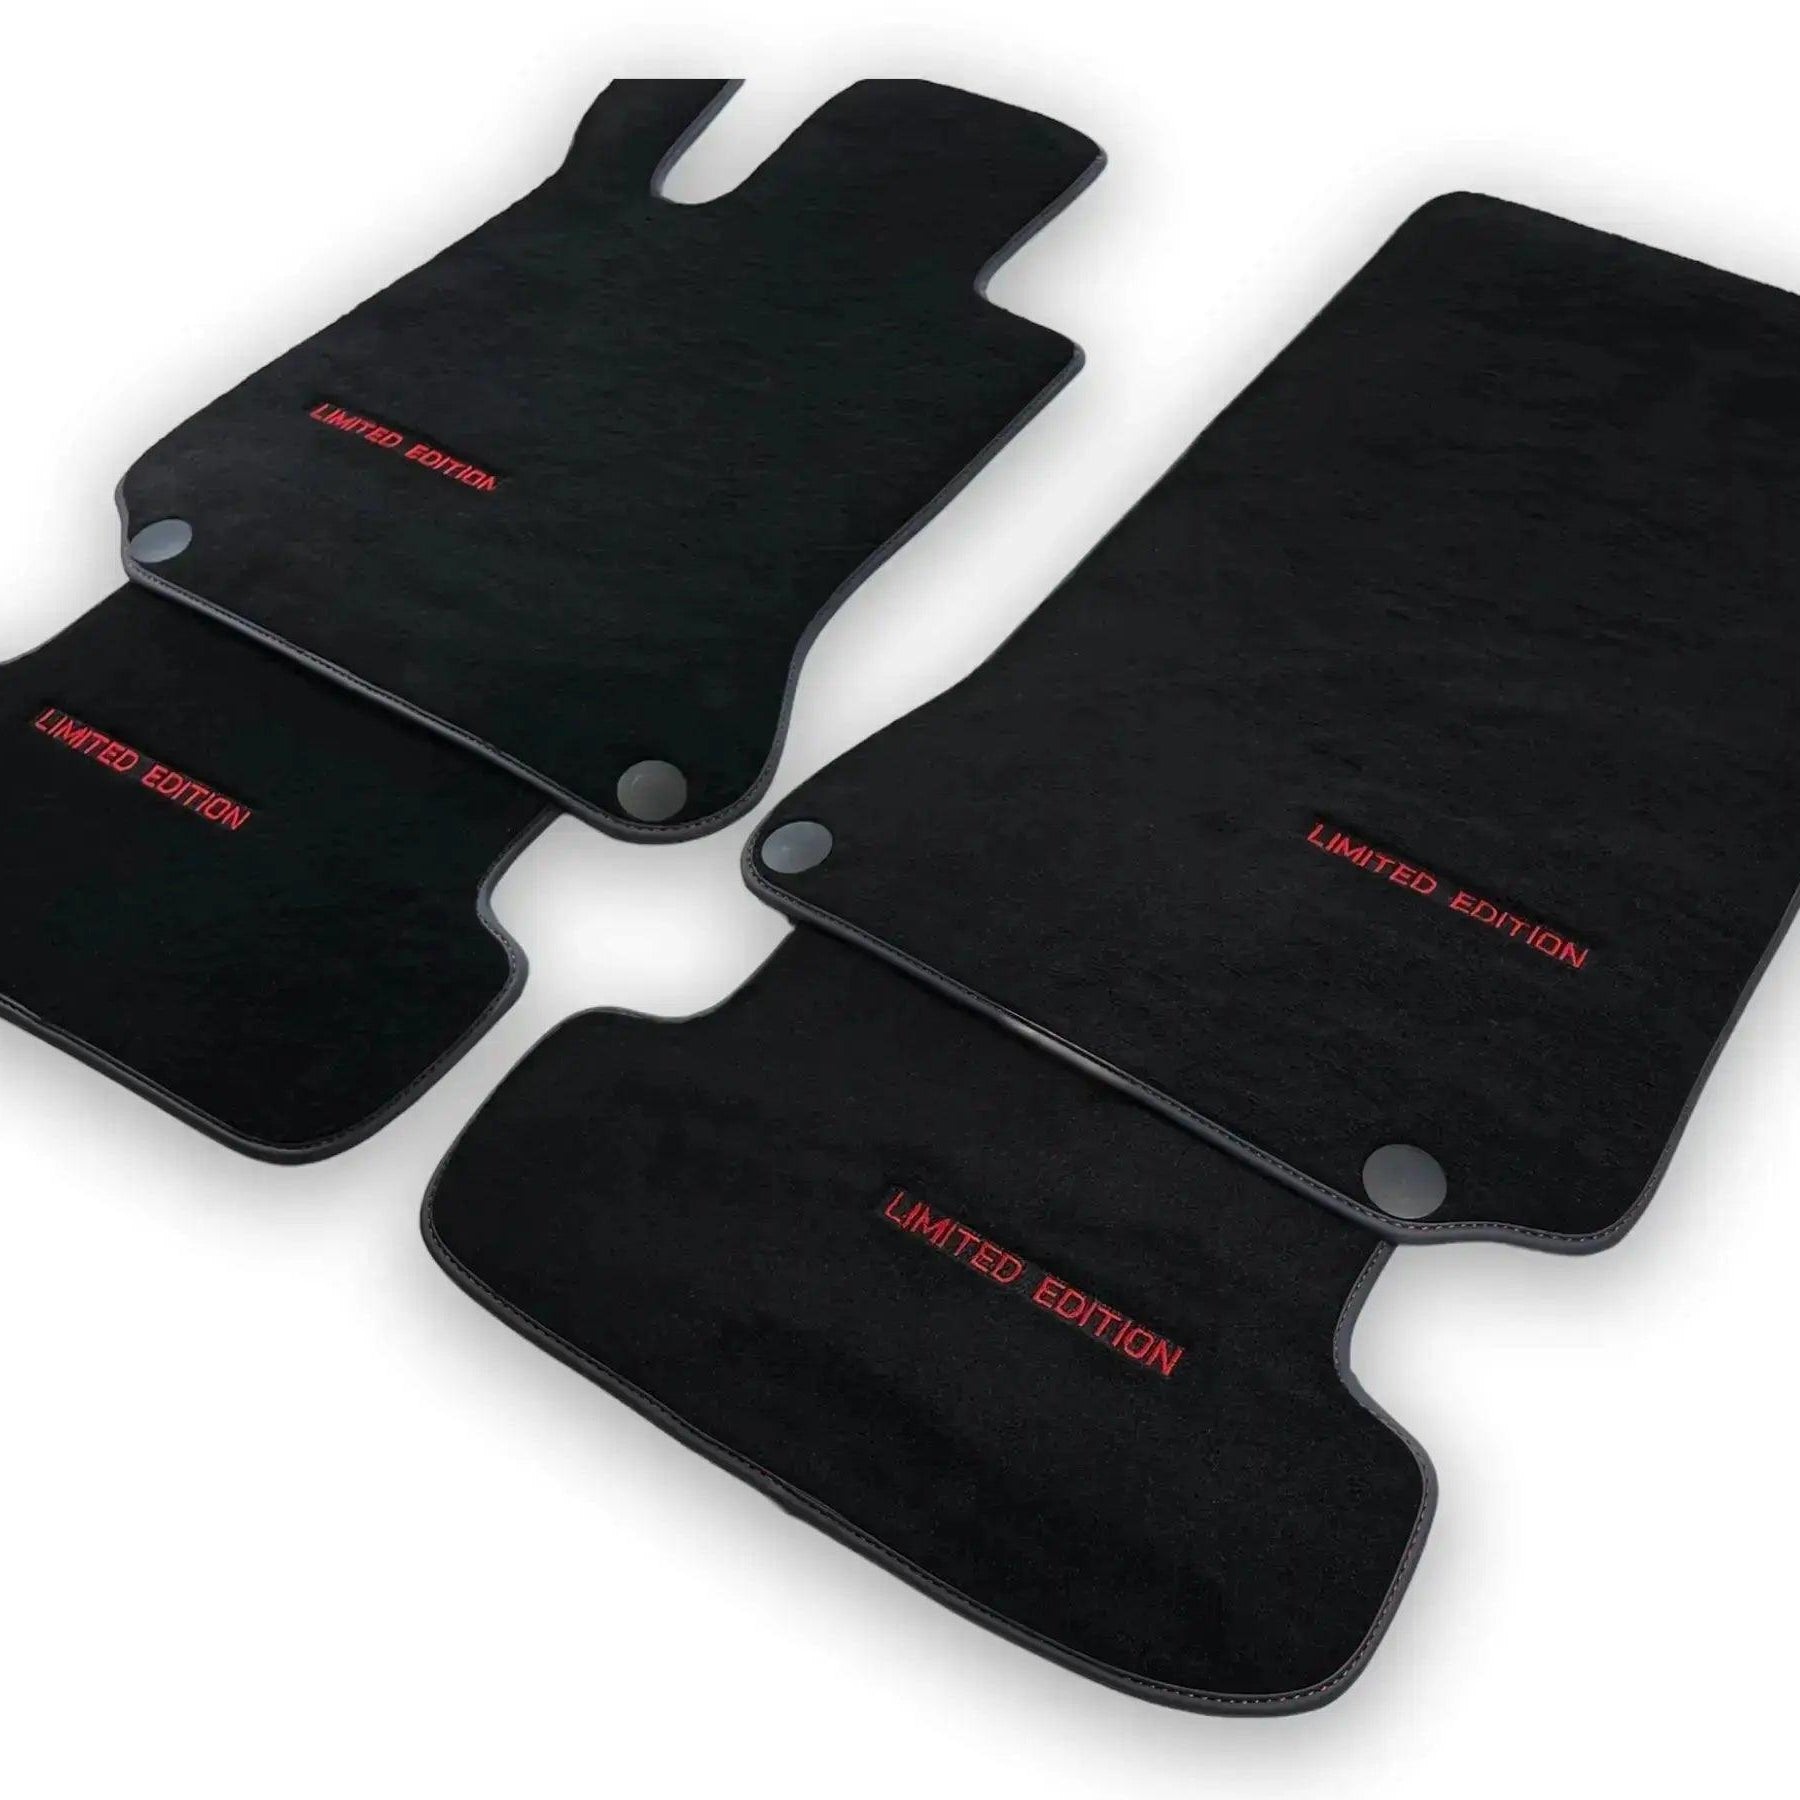 Gray Floor Mats For Mercedes Benz EQC-Class N293 (2019-2023) | Limited Edition